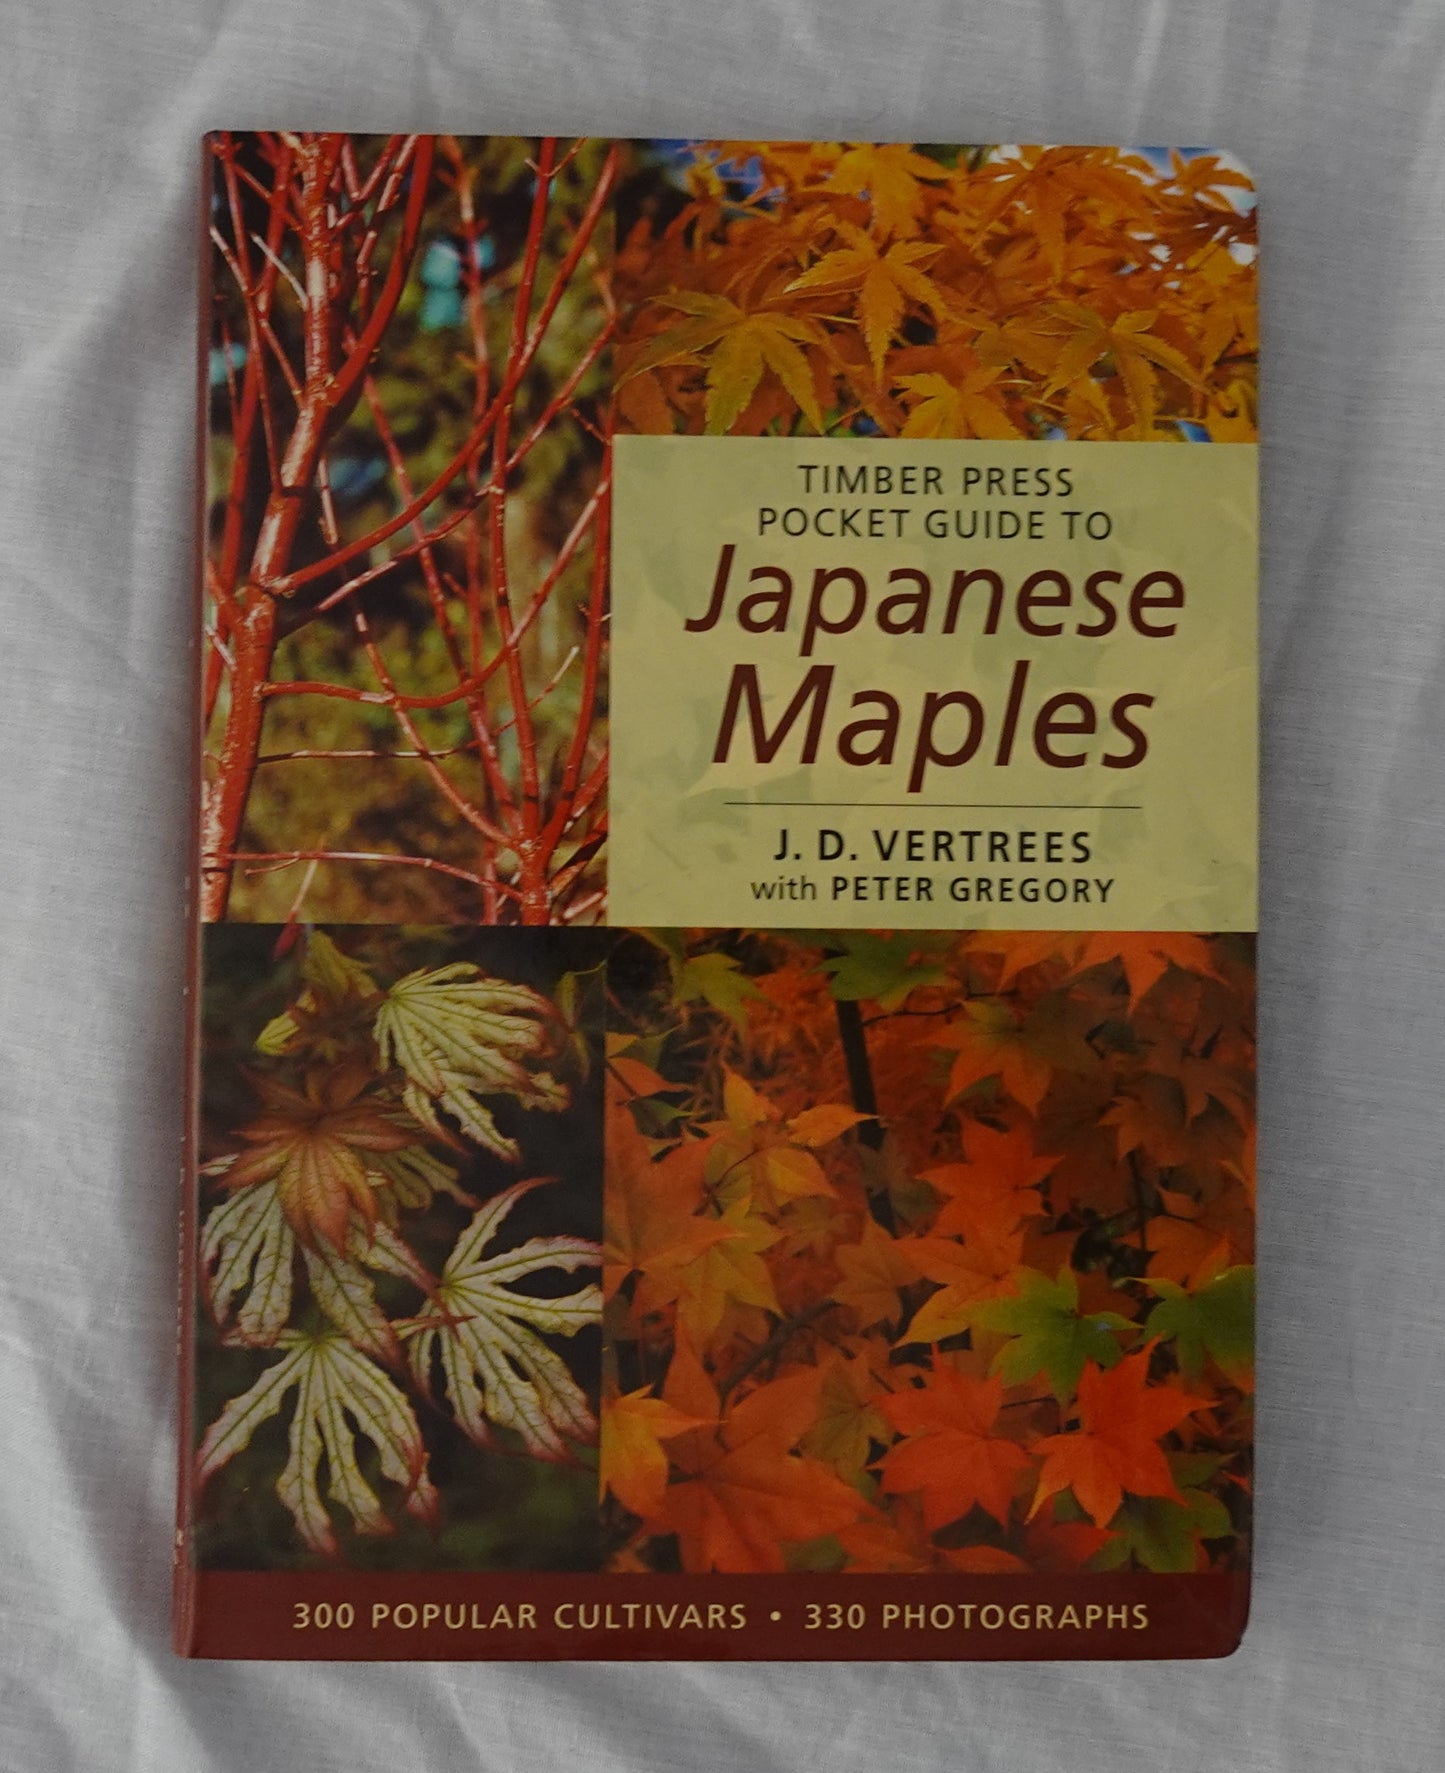 Japanese Maples  Timber Press Pocket Guide to  by J. D. Vertrees  with Peter Gregory